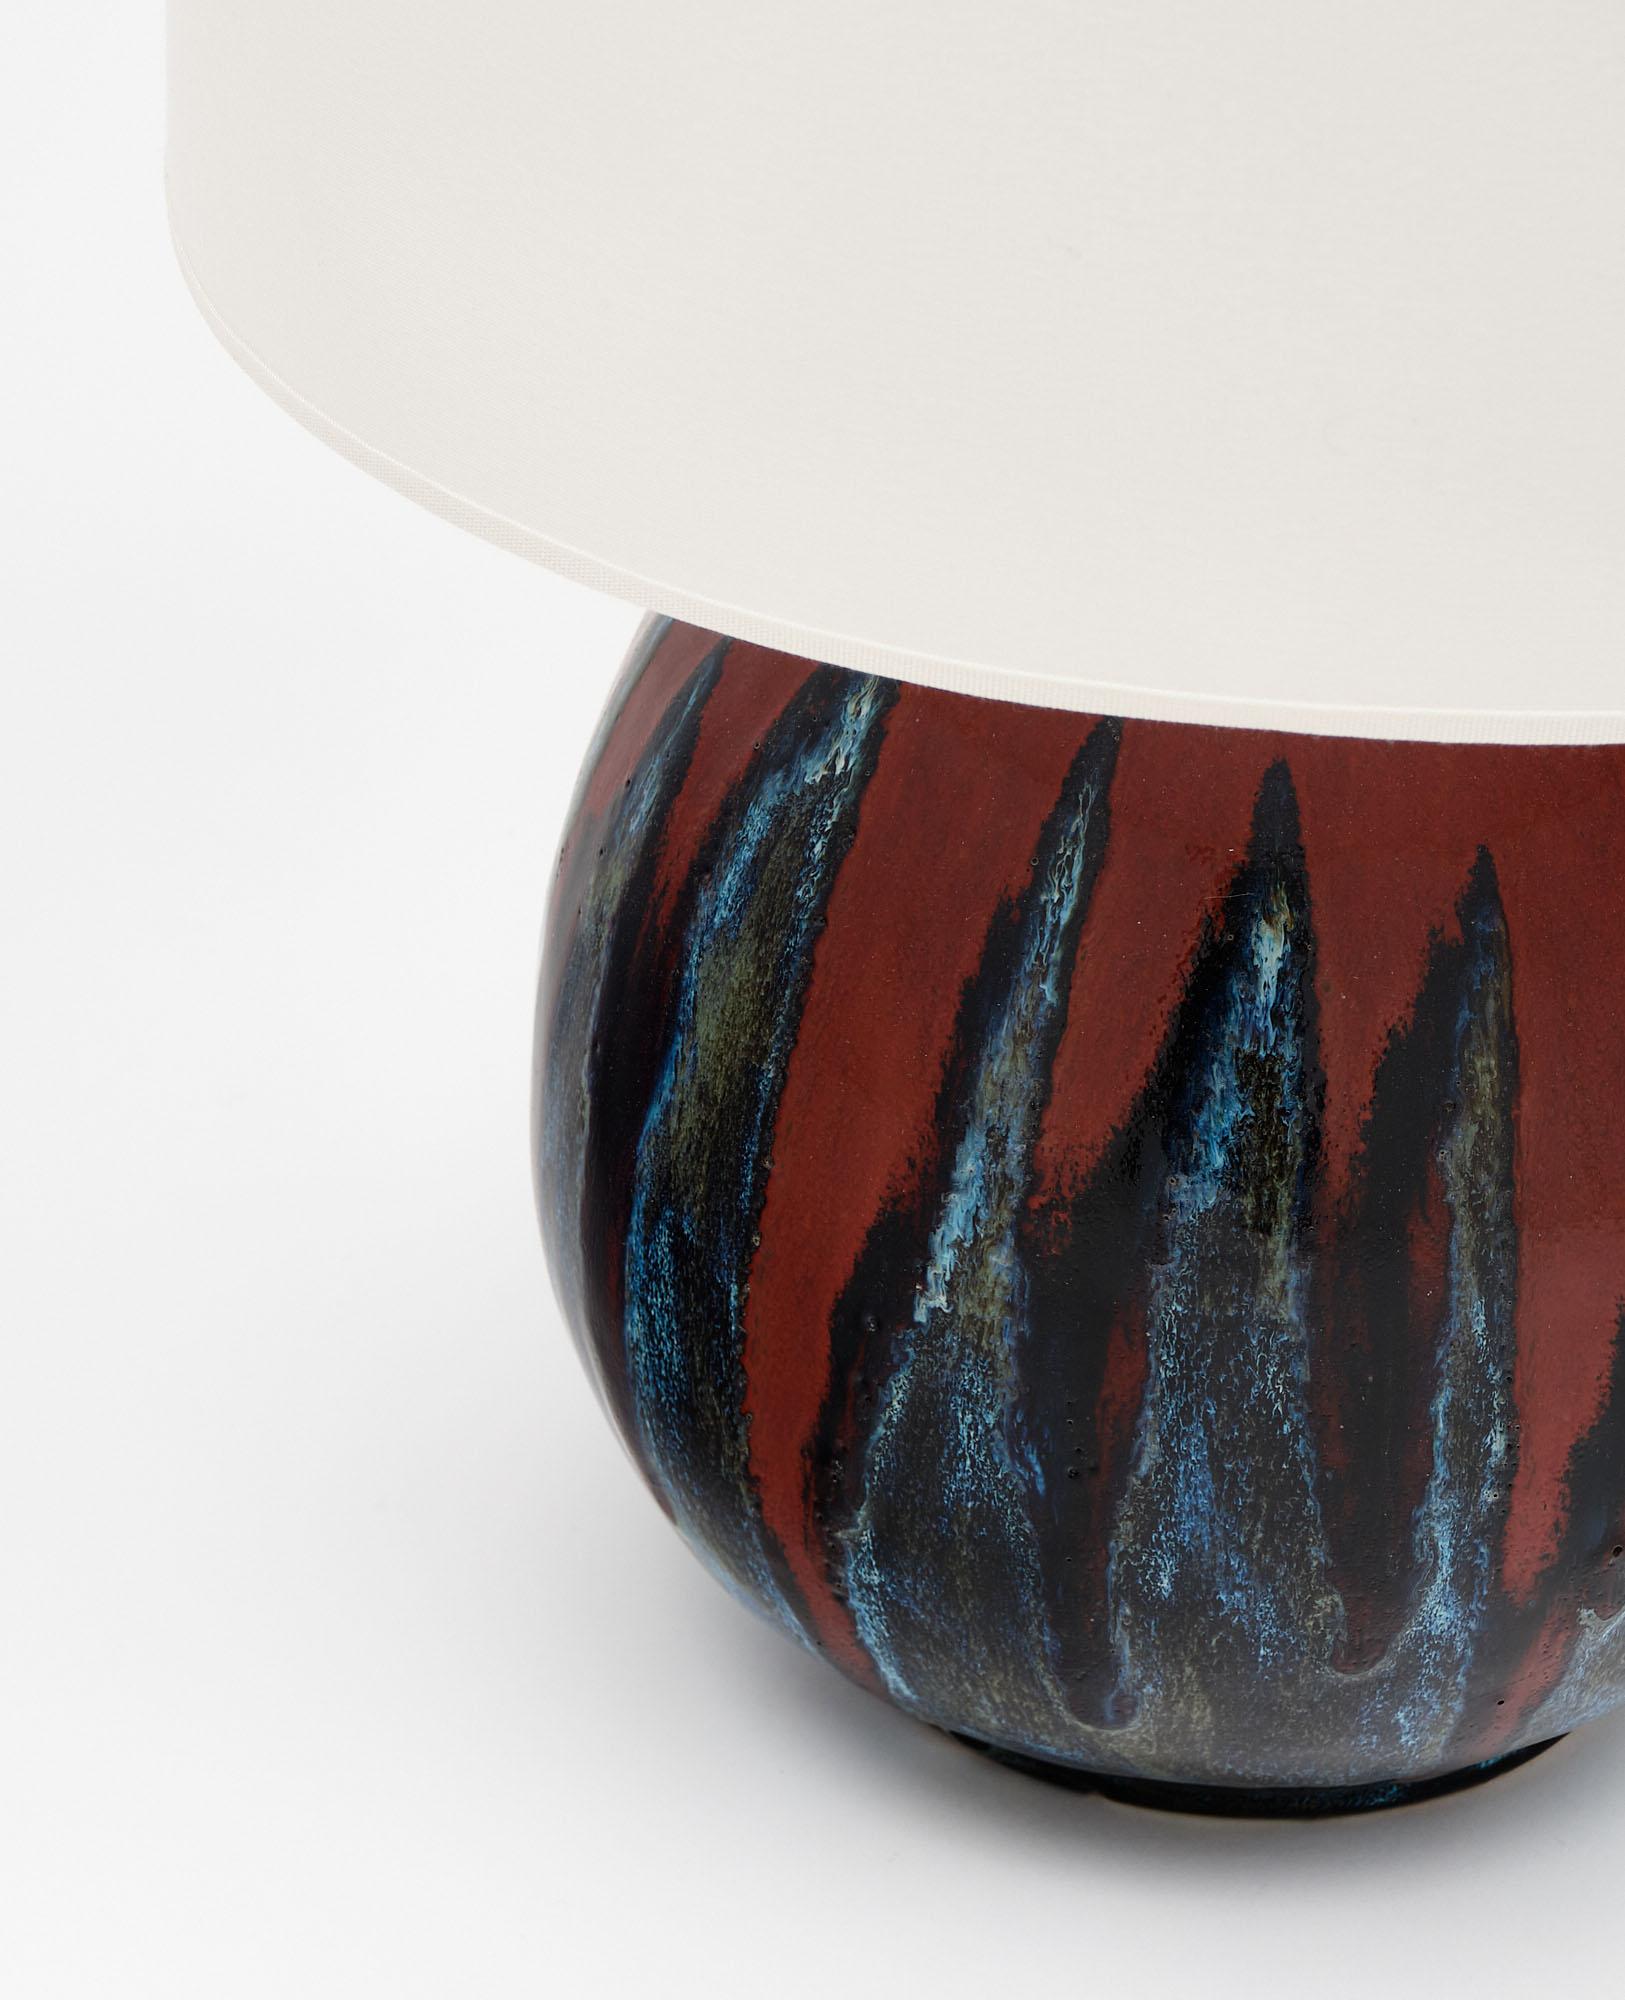 Table lamp from Vallauris, France made of glazed ceramic. This piece has been newly wired to fit US standards.